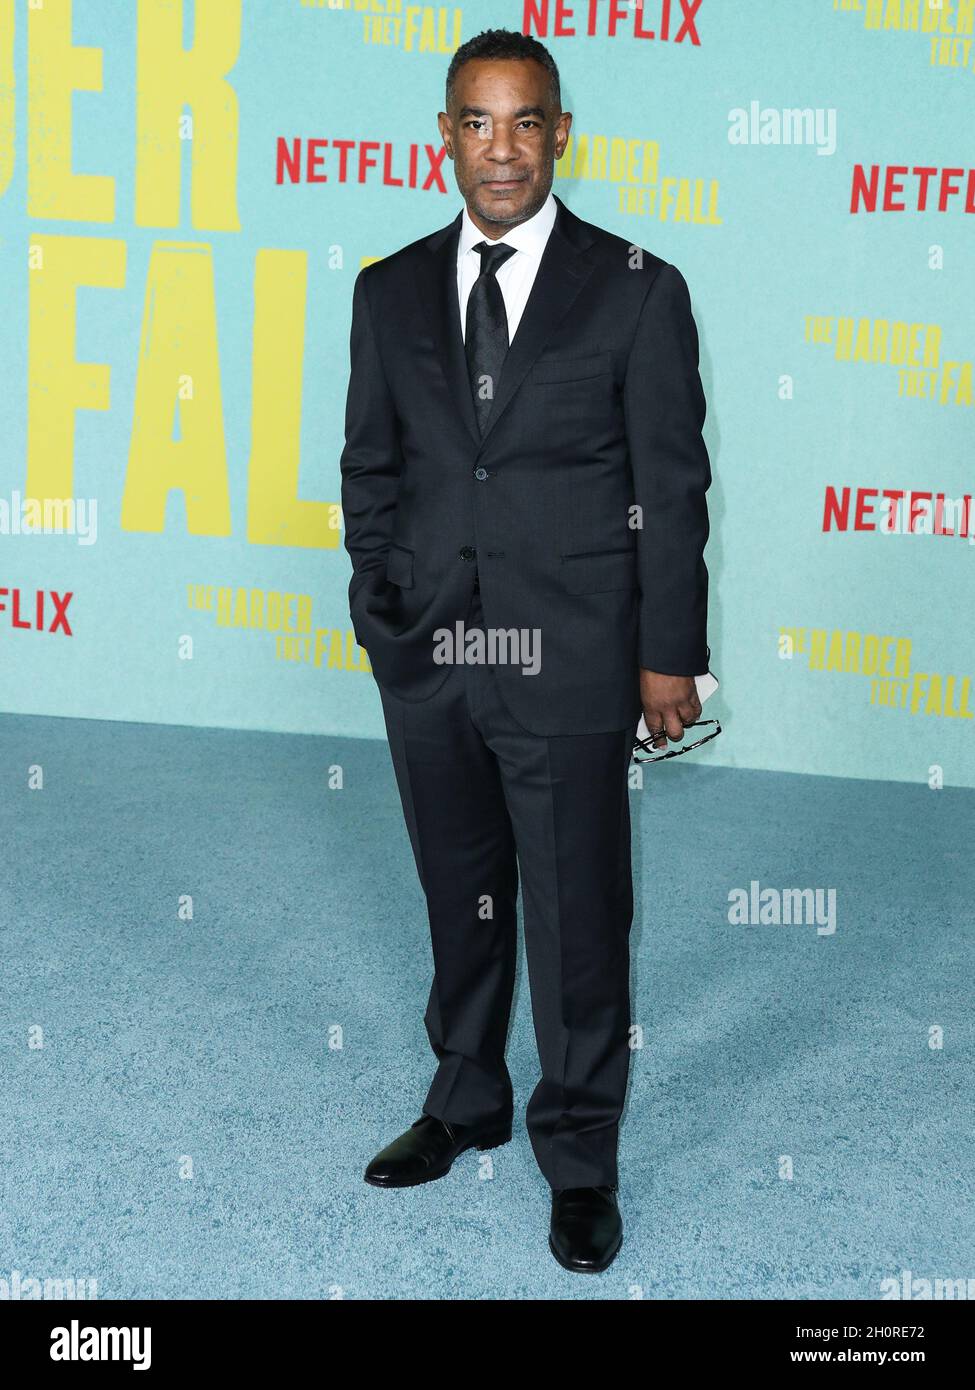 Los Angeles, United States. 13th Oct, 2021. LOS ANGELES, CALIFORNIA, USA - OCTOBER 13: Producer James Lassiter arrives at the Los Angeles Premiere Of Netflix's 'The Harder They Fall' held at the Shrine Auditorium and Expo Hall on October 13, 2021 in Los Angeles, California, United States. (Photo by Xavier Collin/Image Press Agency/Sipa USA) Credit: Sipa USA/Alamy Live News Stock Photo